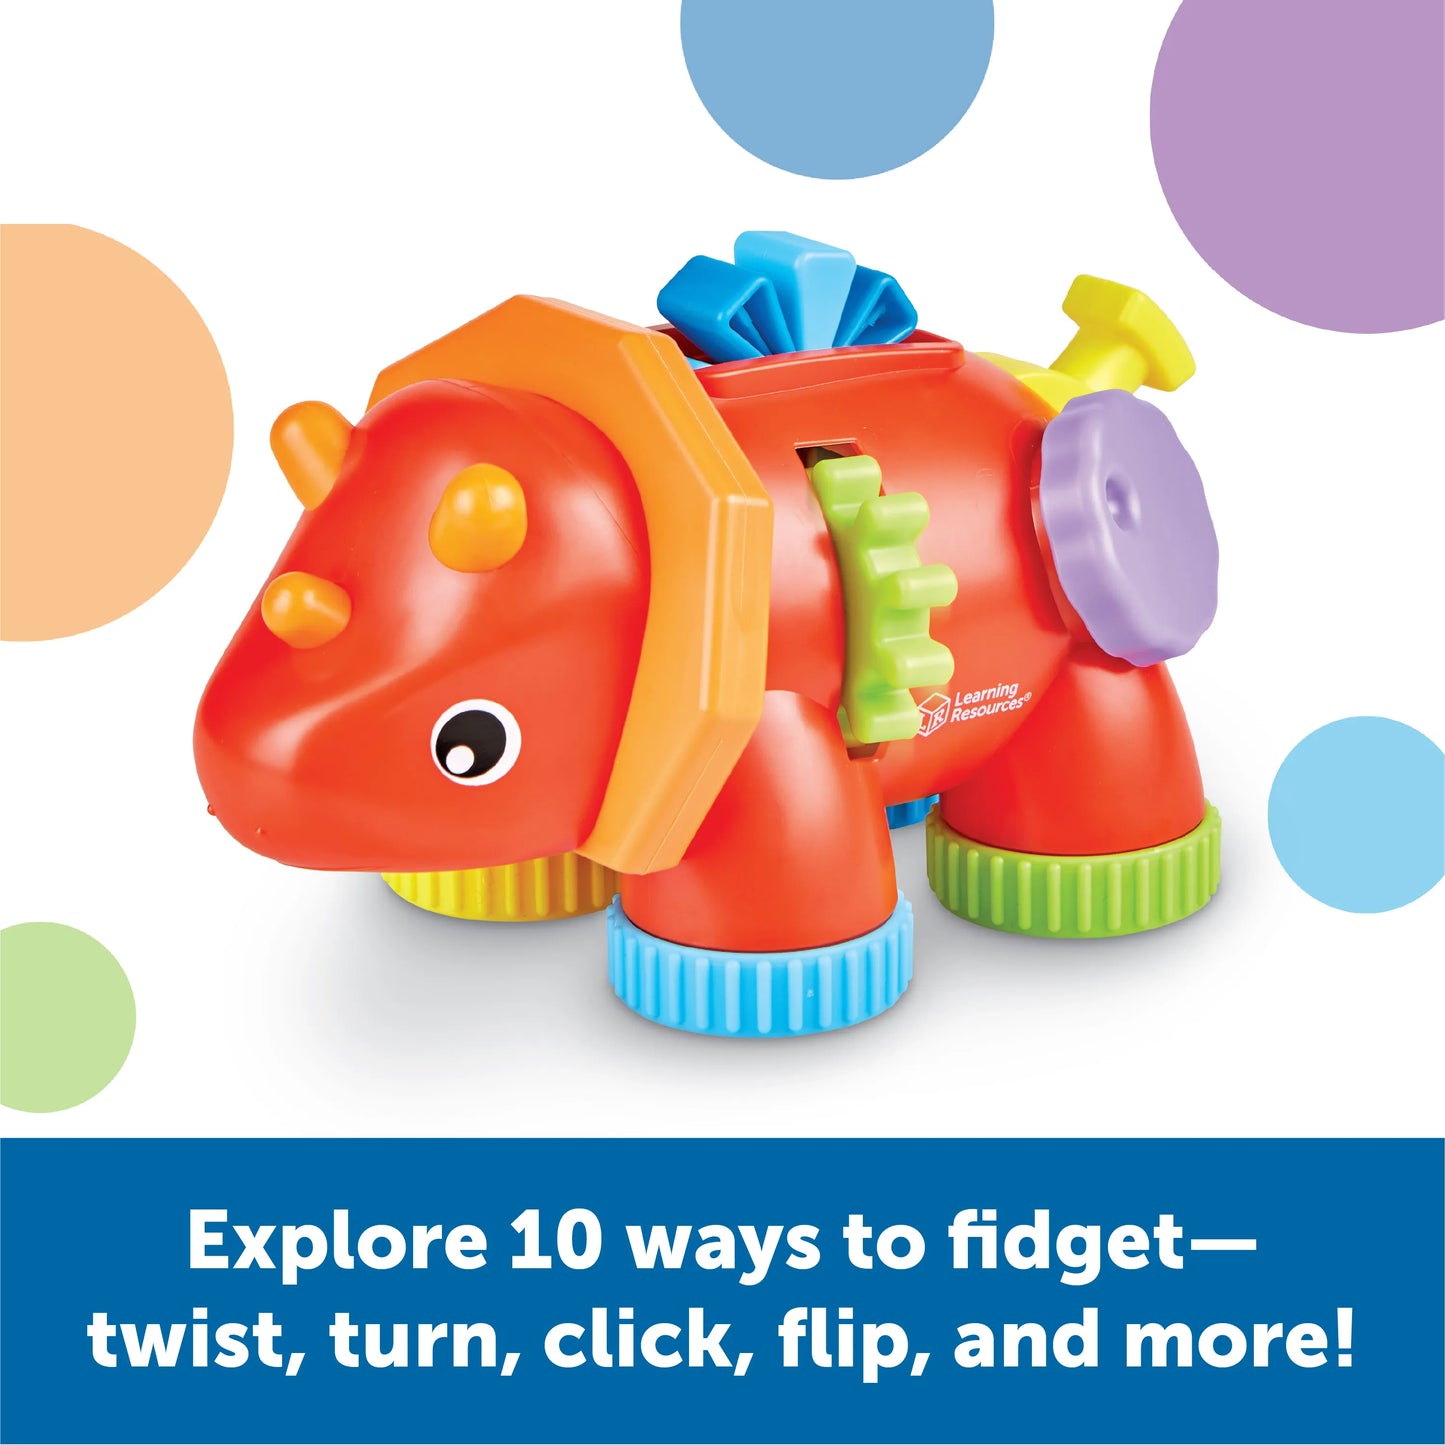 Learning Resources Tracy the Fidget Triceratops Sensory & Fine Motor Toys